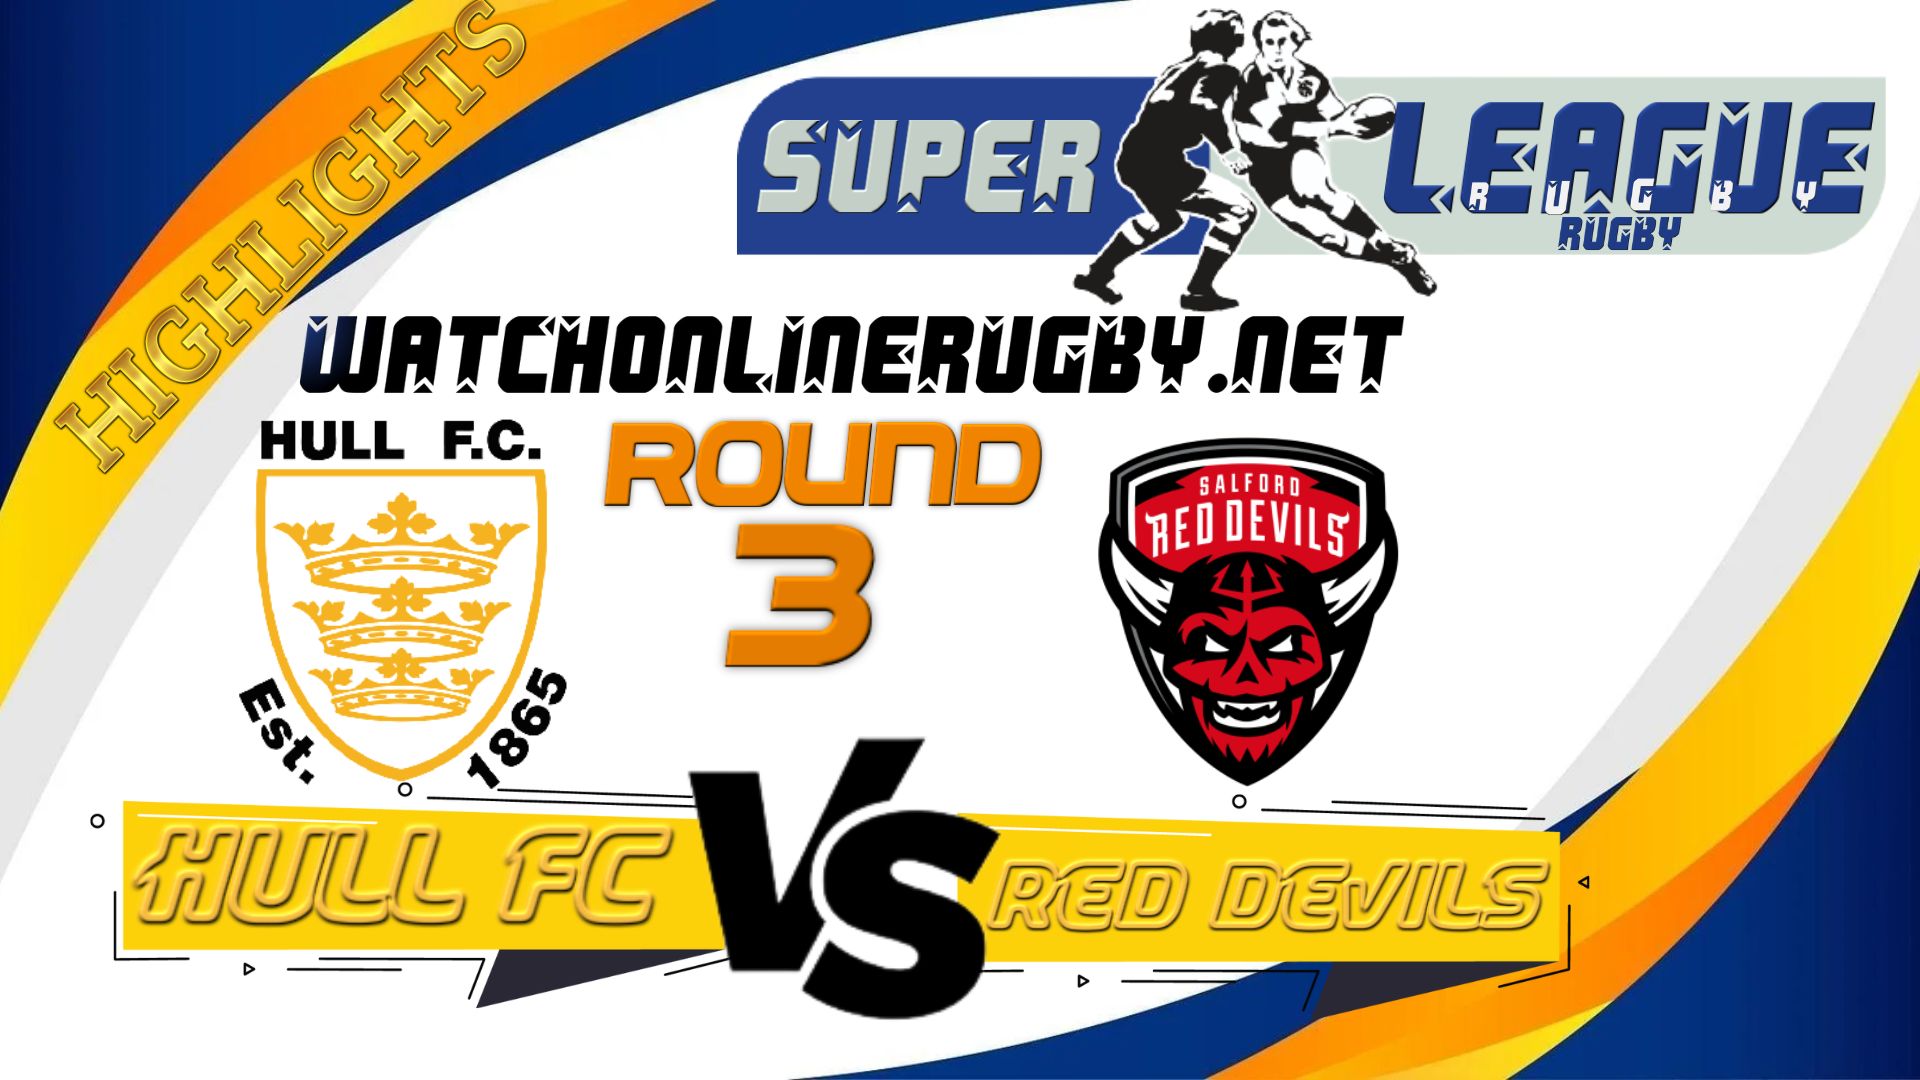 Hull FC Vs Salford Red Devils Super League Rugby 2022 RD 3